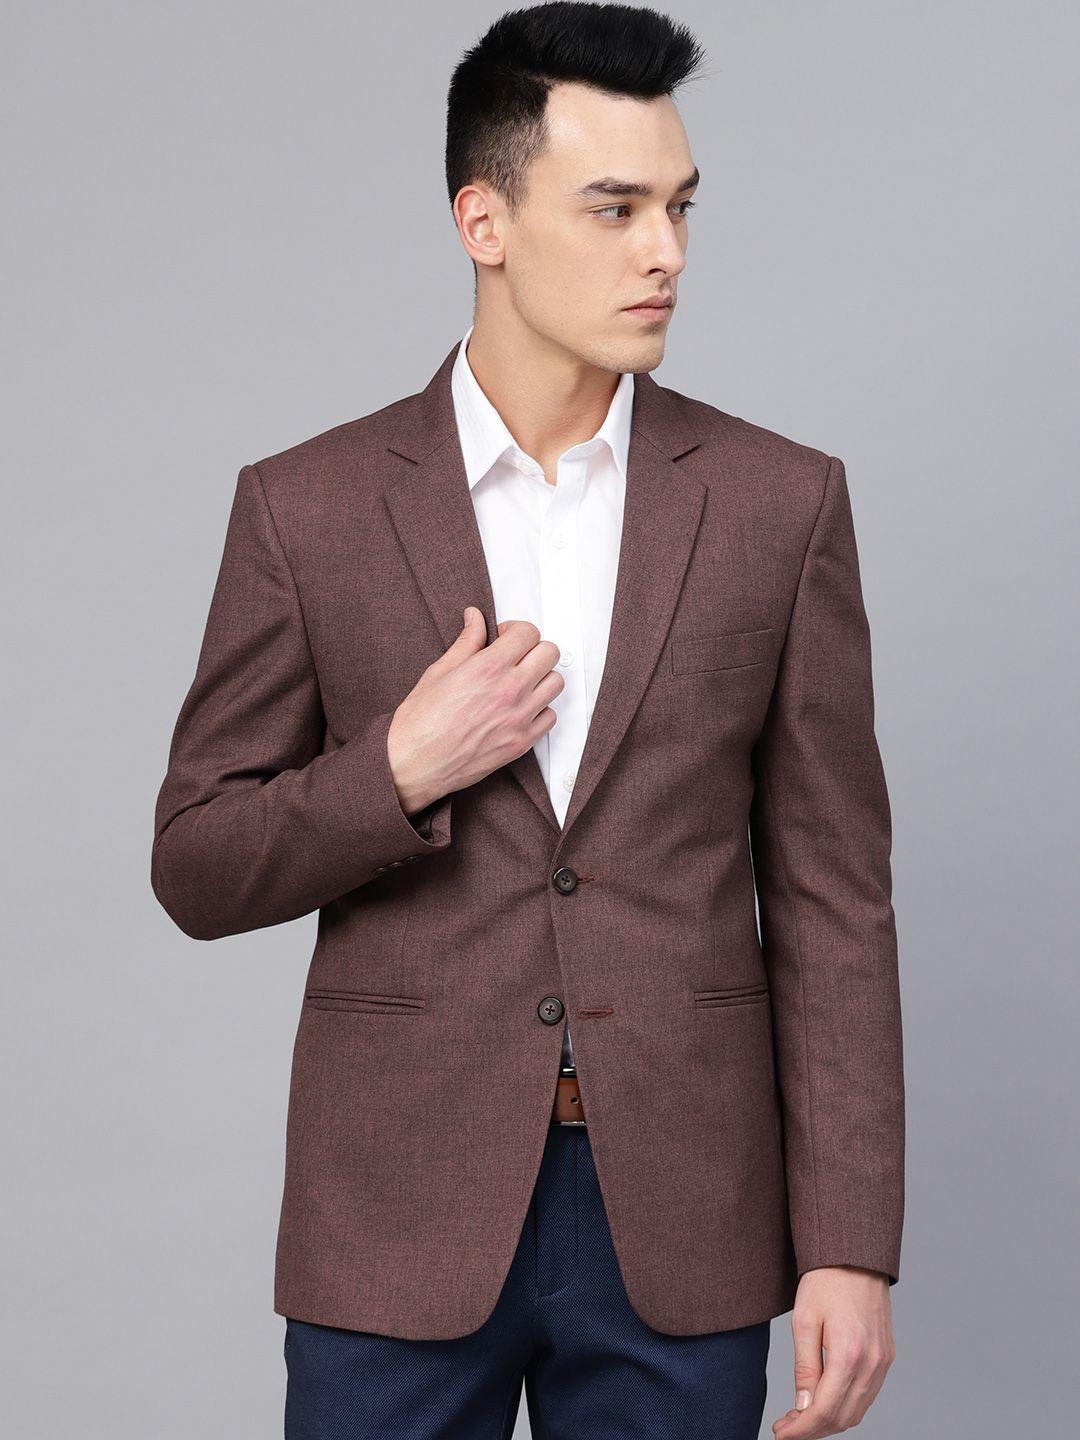 manq copper brown solid slim fit single-breasted formal blazer